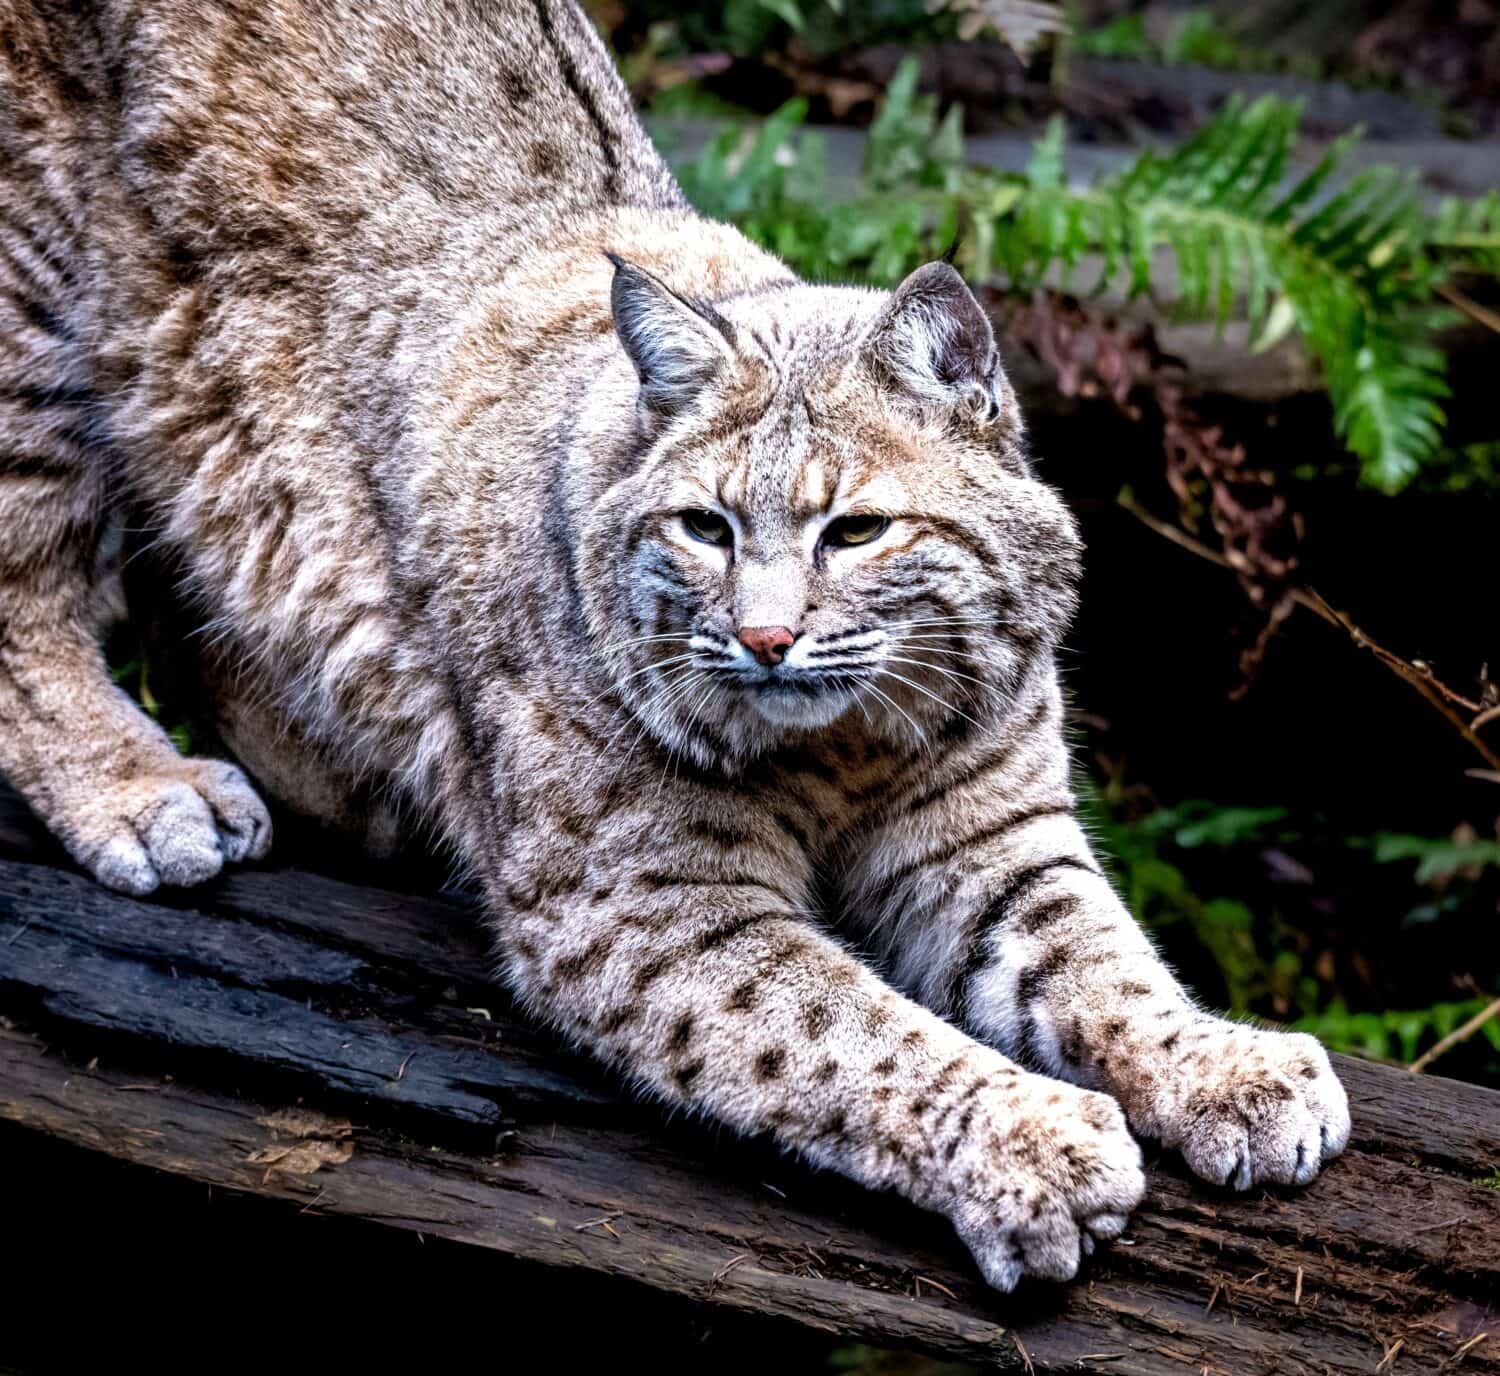 A bobcat with detailed fur markings sharpening its claws on a log